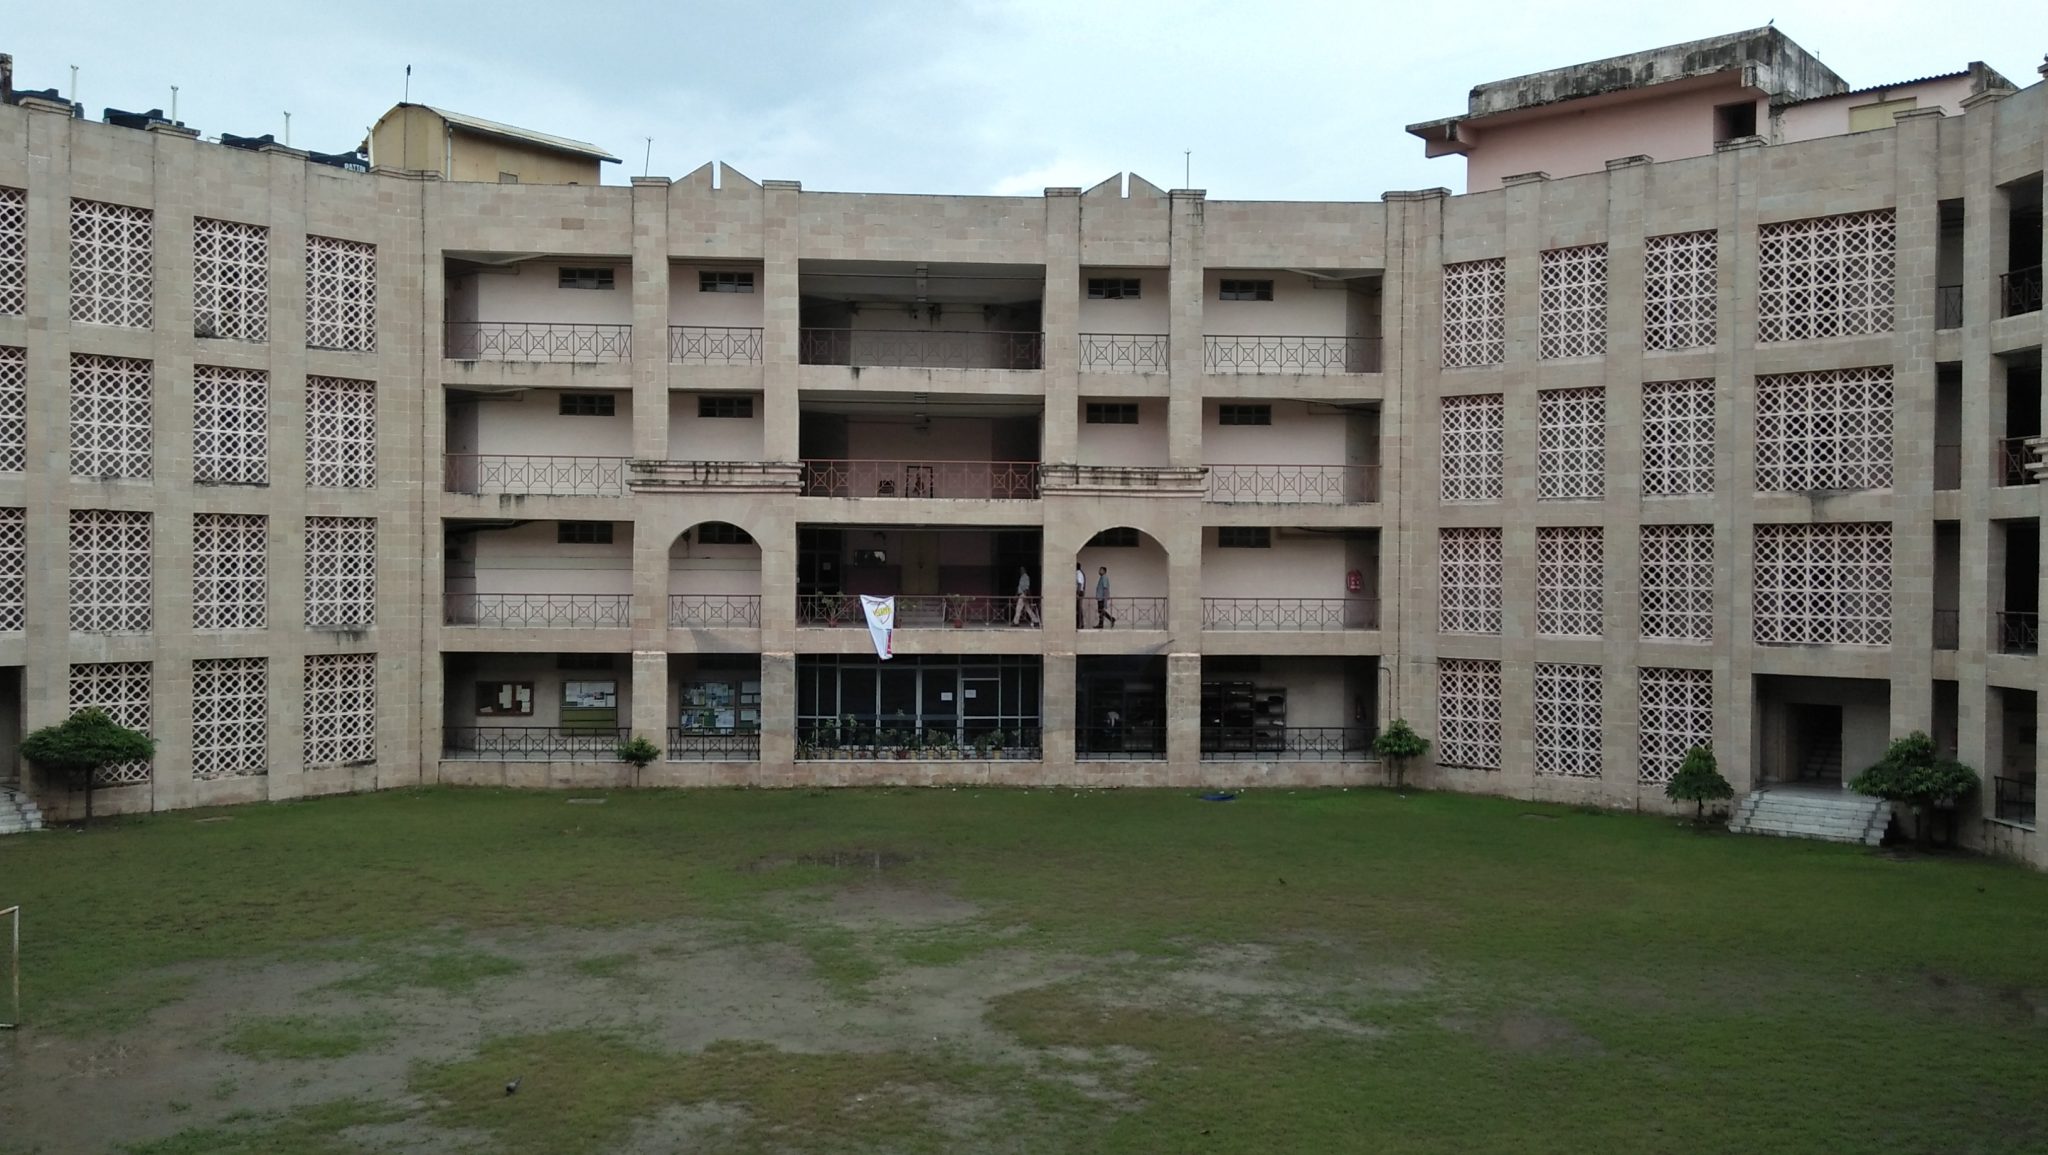 The West Bengal National University of Juridical Sciences